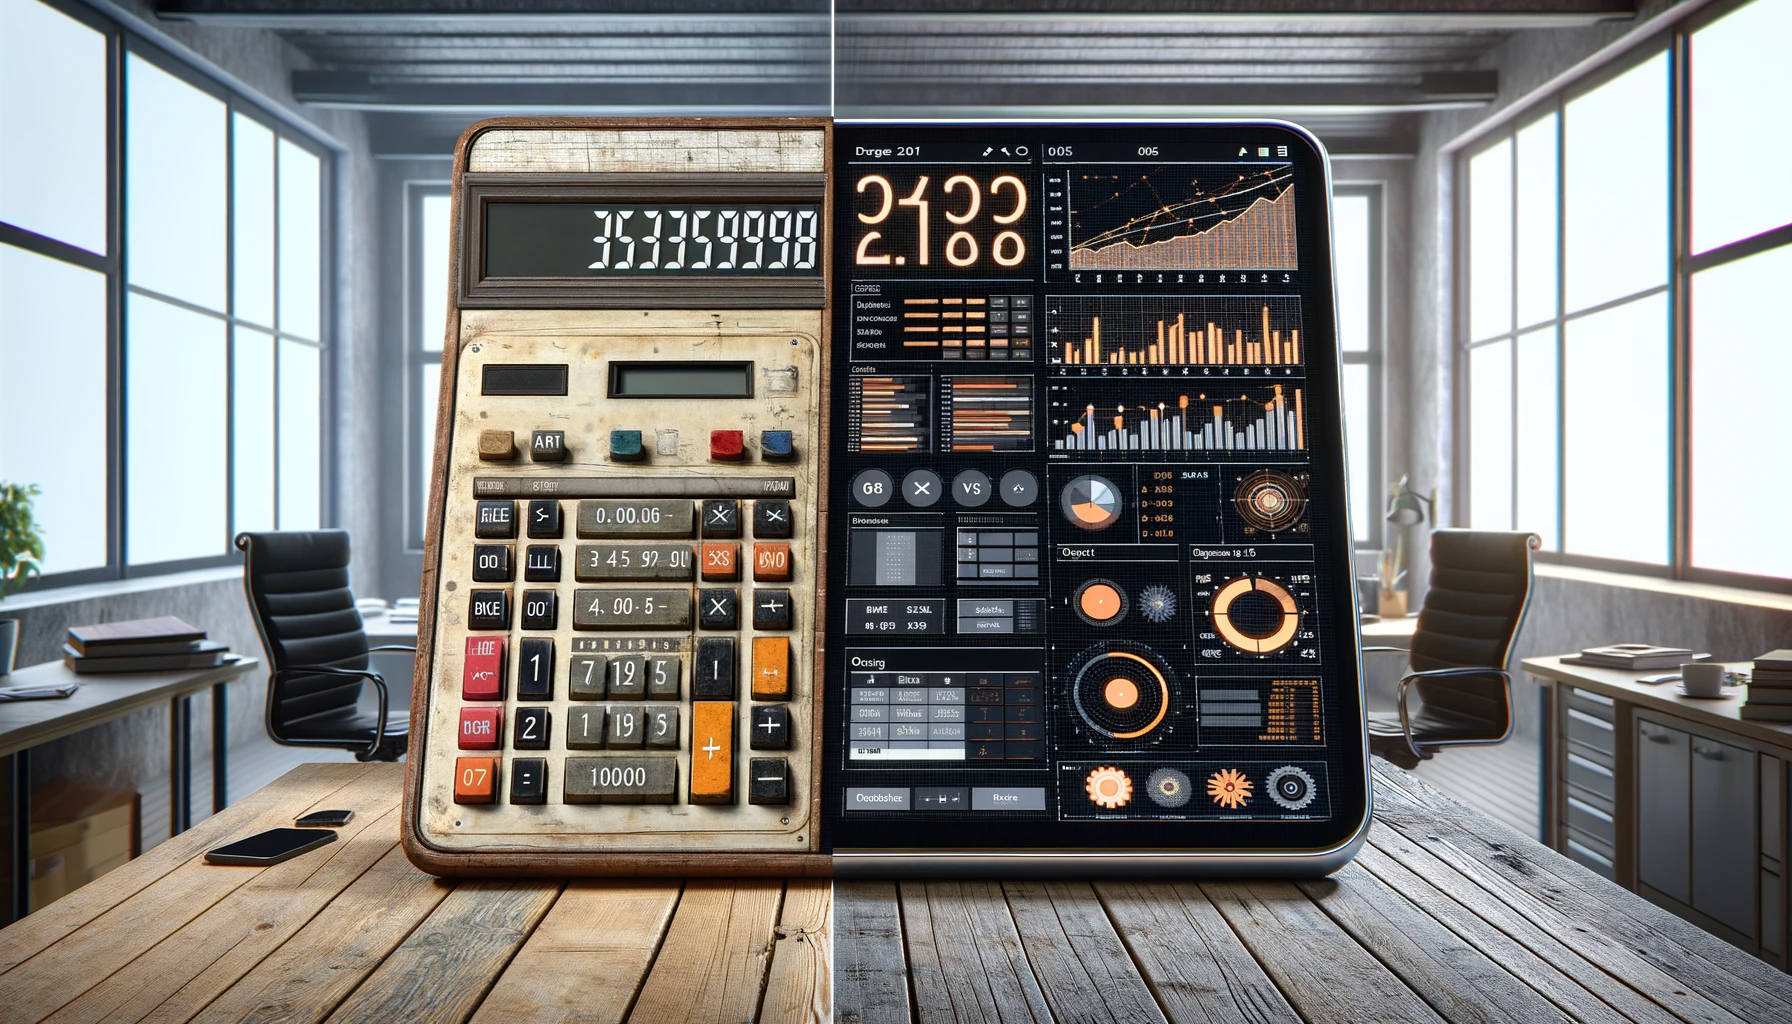  Side-by-side image: on the left shows an old hand-held calculator and on the right shows a modern online business calculator in a sleek office.